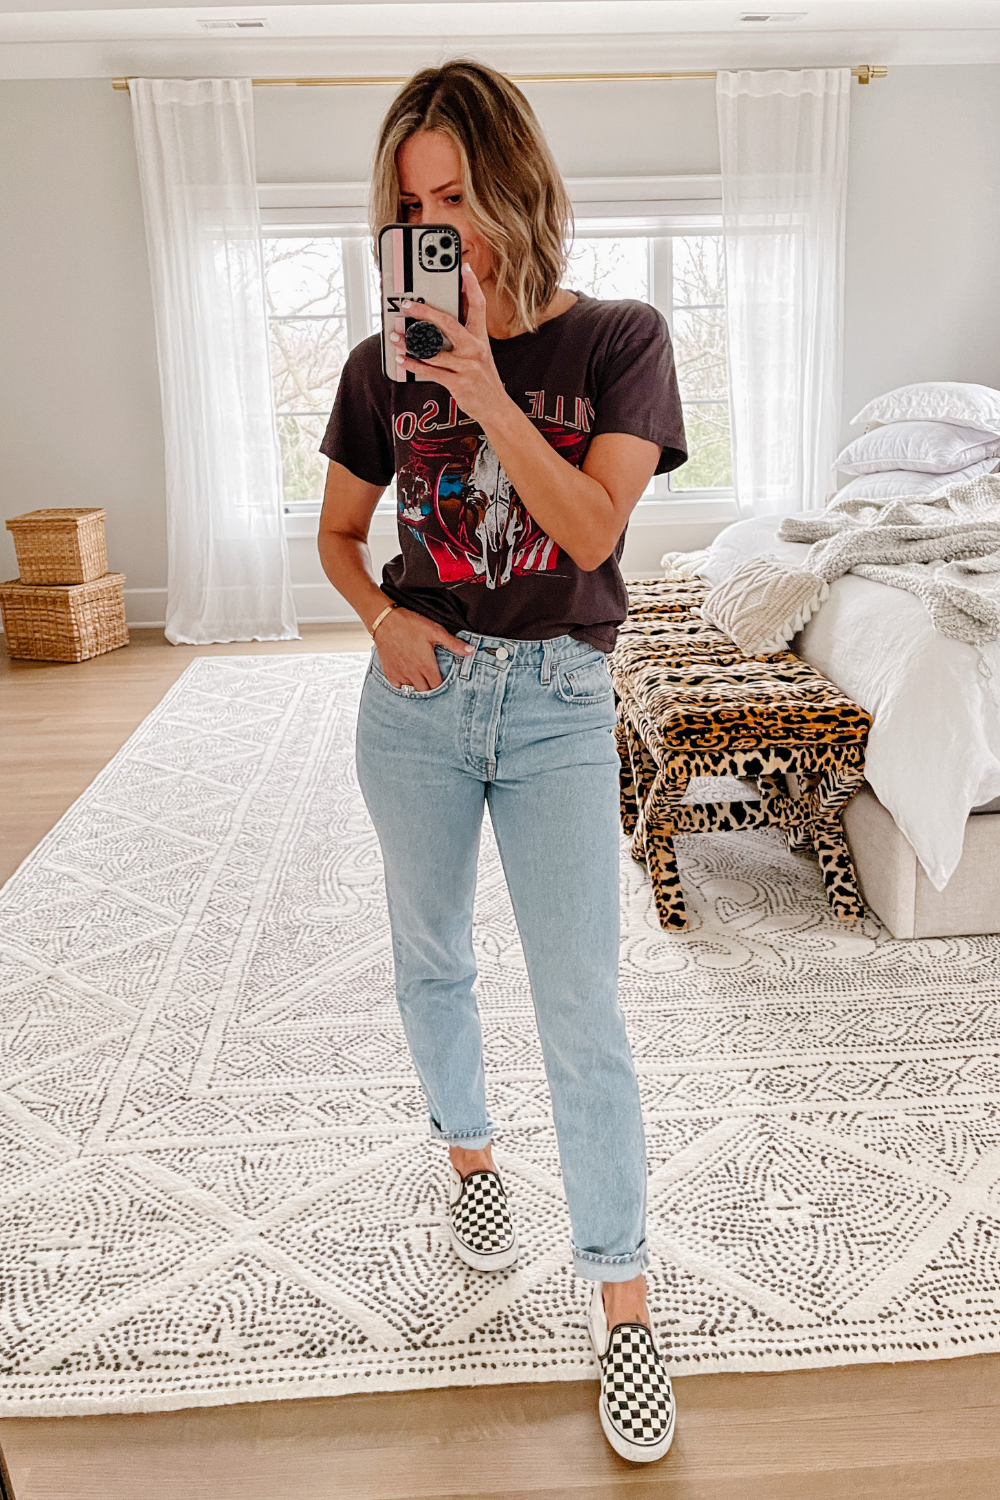 Suzanne wearing a Willie Nelson tee, denim jeans, and Vans 